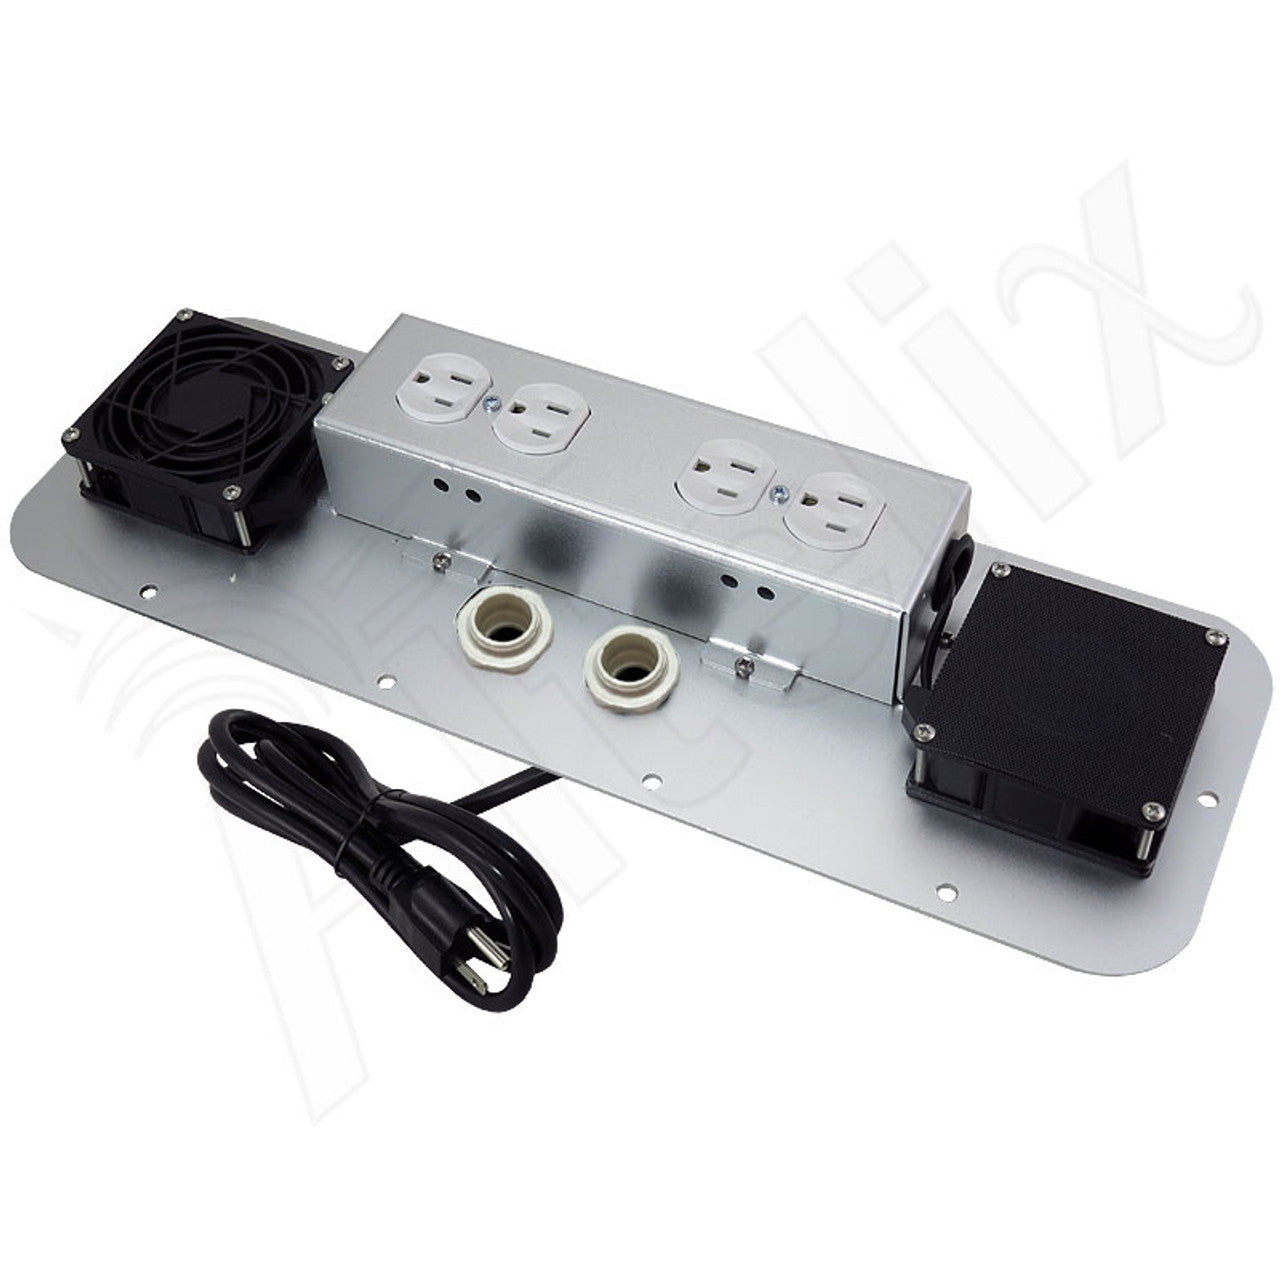 Power Module with 120VAC Outlets and Cooling Fan for NS242012, NS242412, NX242416, NS242416, NS242424, NS282416 and NS322416 Enclosures-1